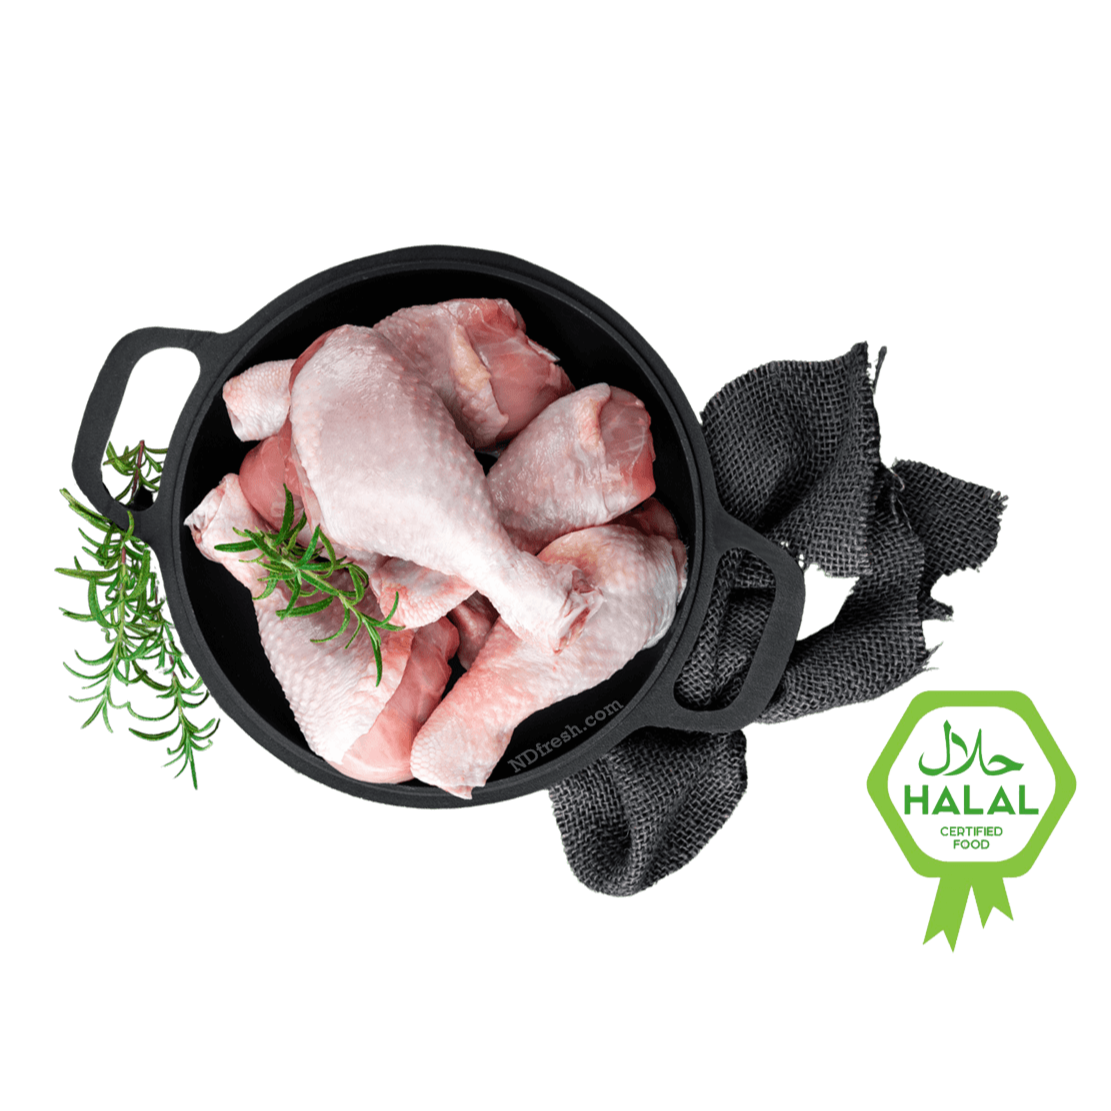 Halal Chicken Drumsticks from ndfresh meat online delivery toronto